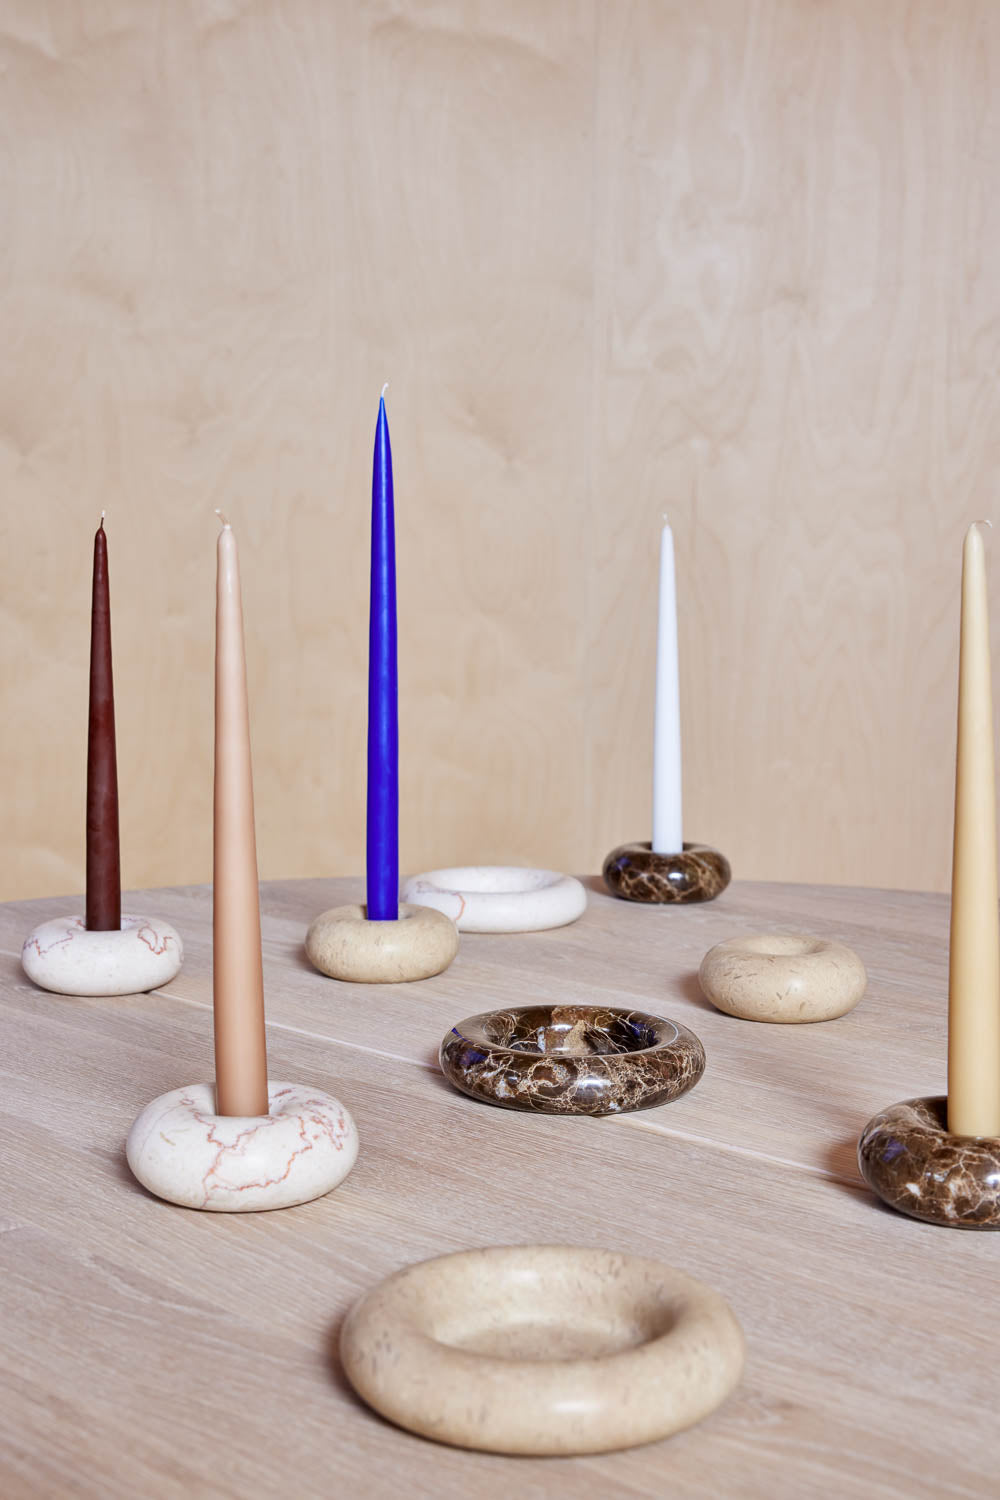 Load image into Gallery viewer, OYOY LIVING Fukai Candles - Medium - Pack of 2 Candle 914 Latte
